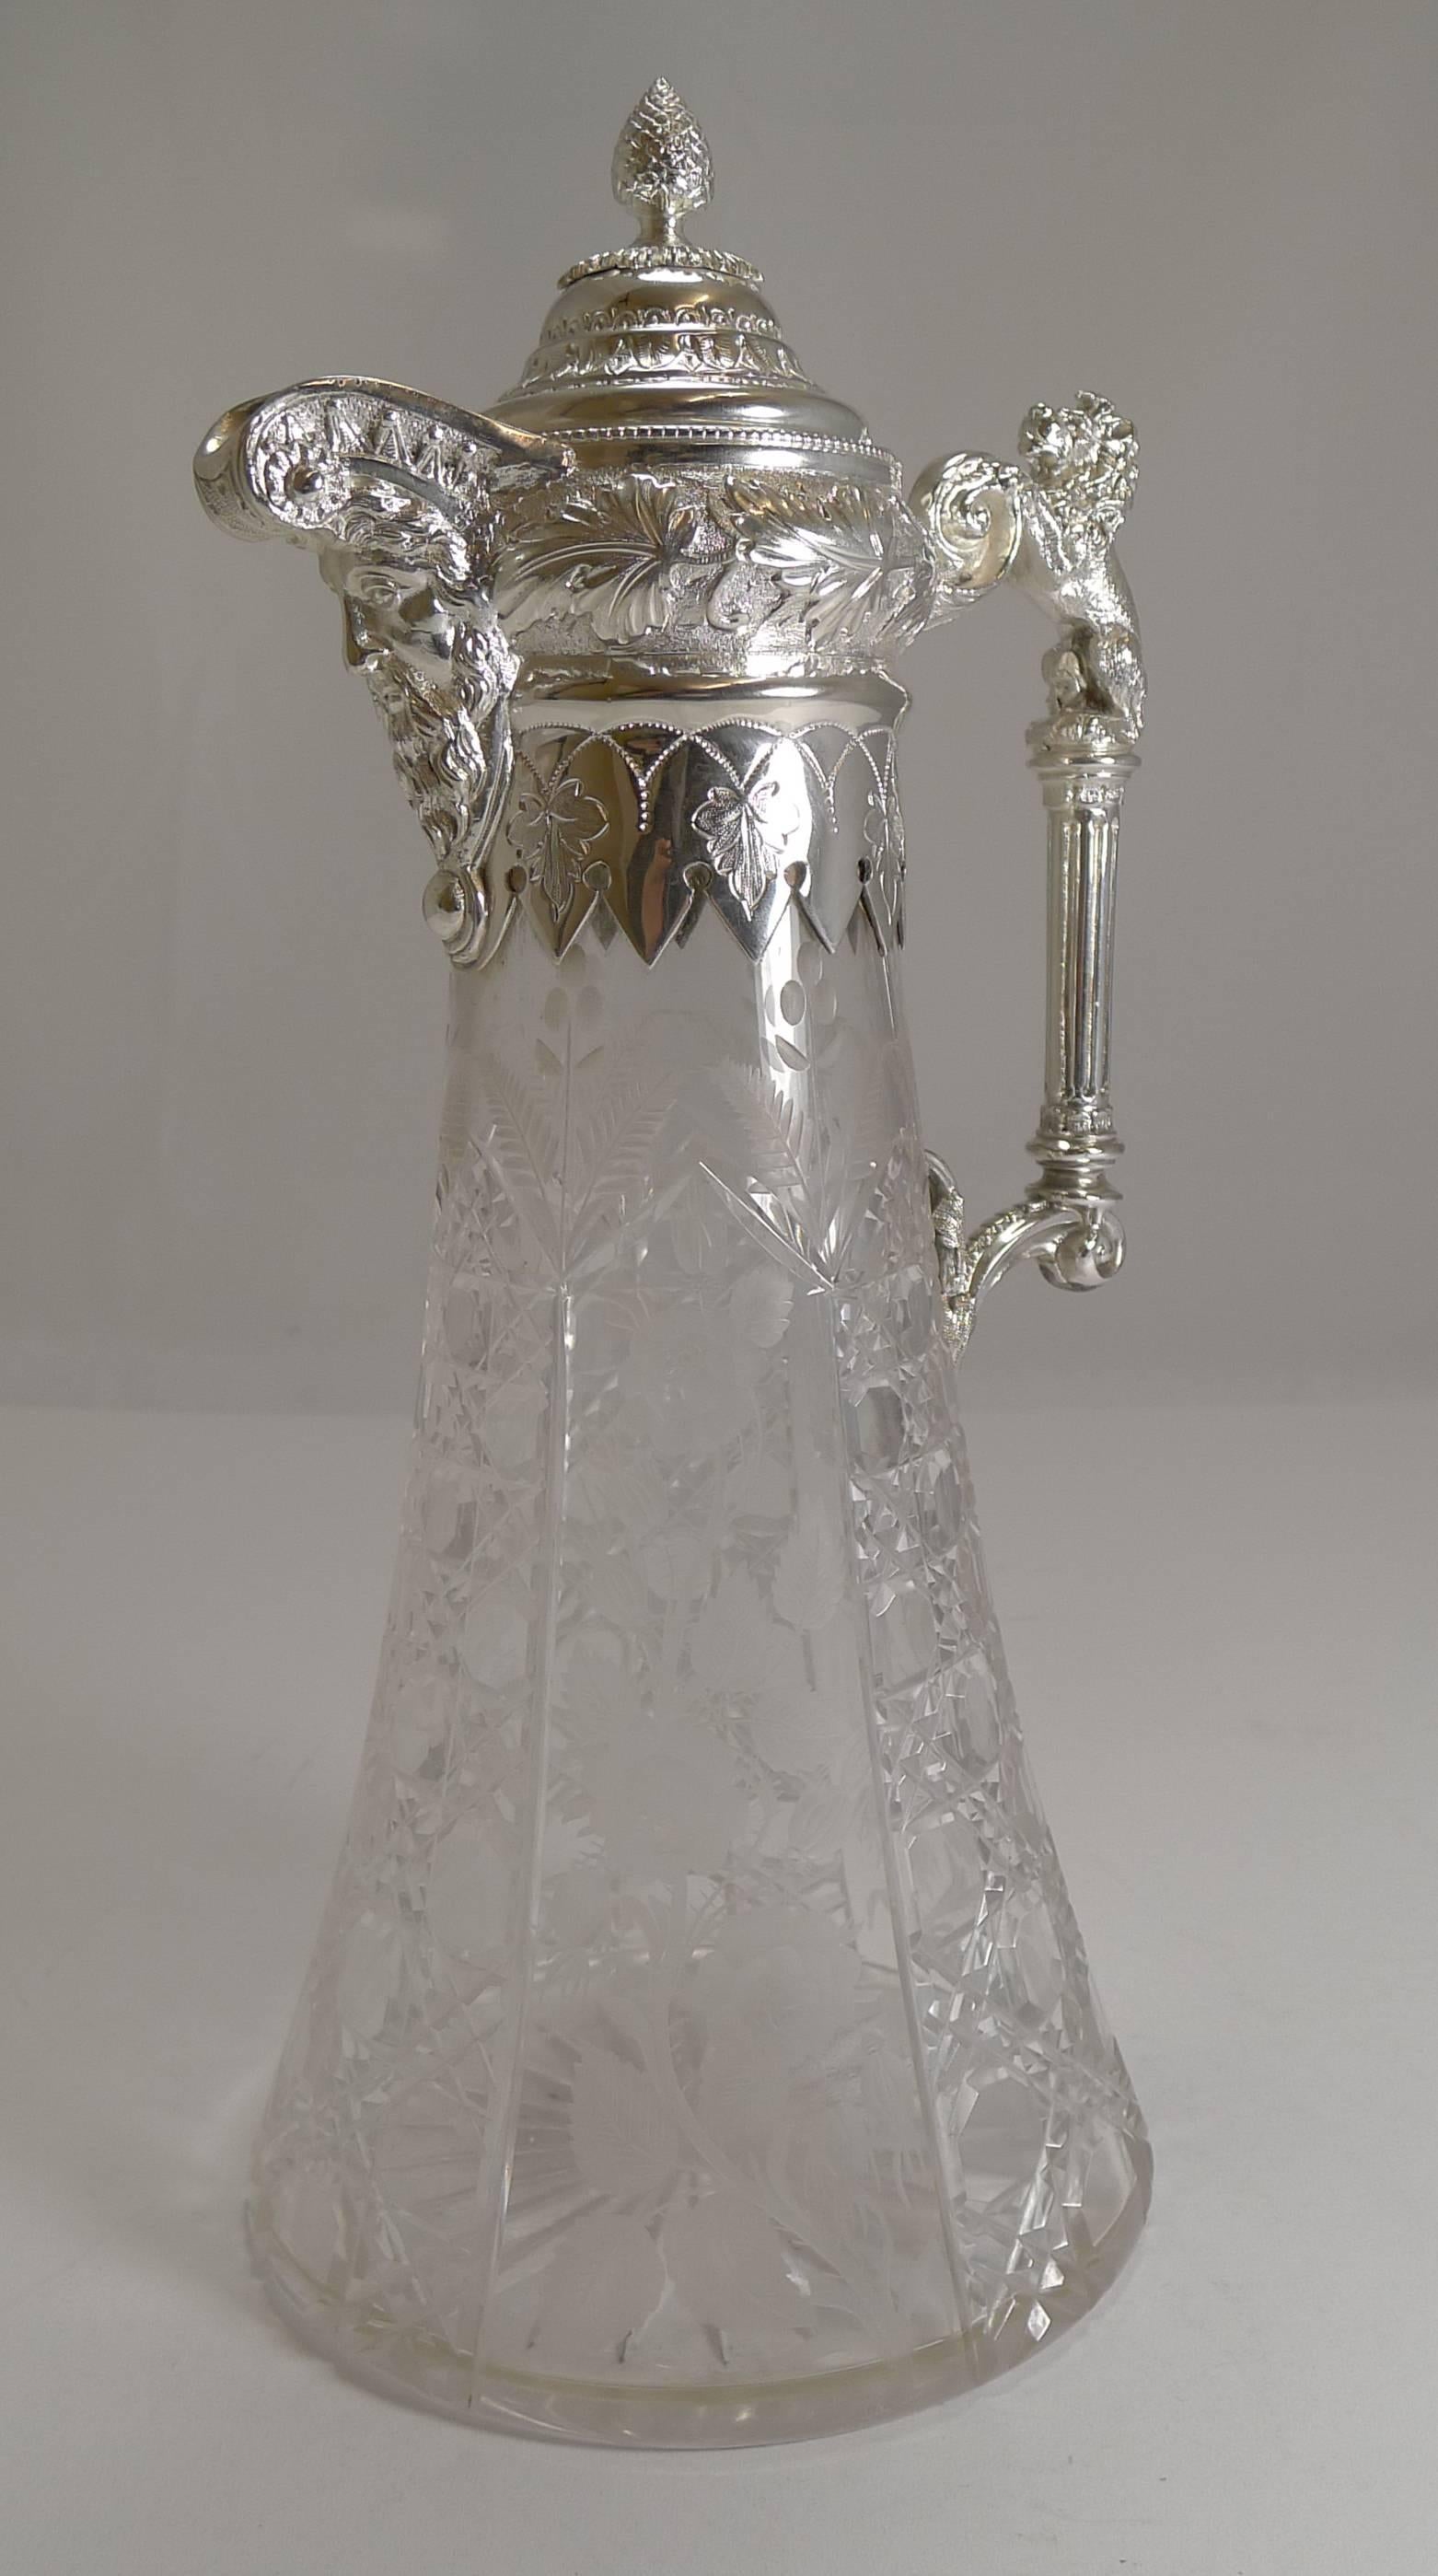 Late Victorian Antique English Crystal and Silver Plate Claret Jug, circa 1880